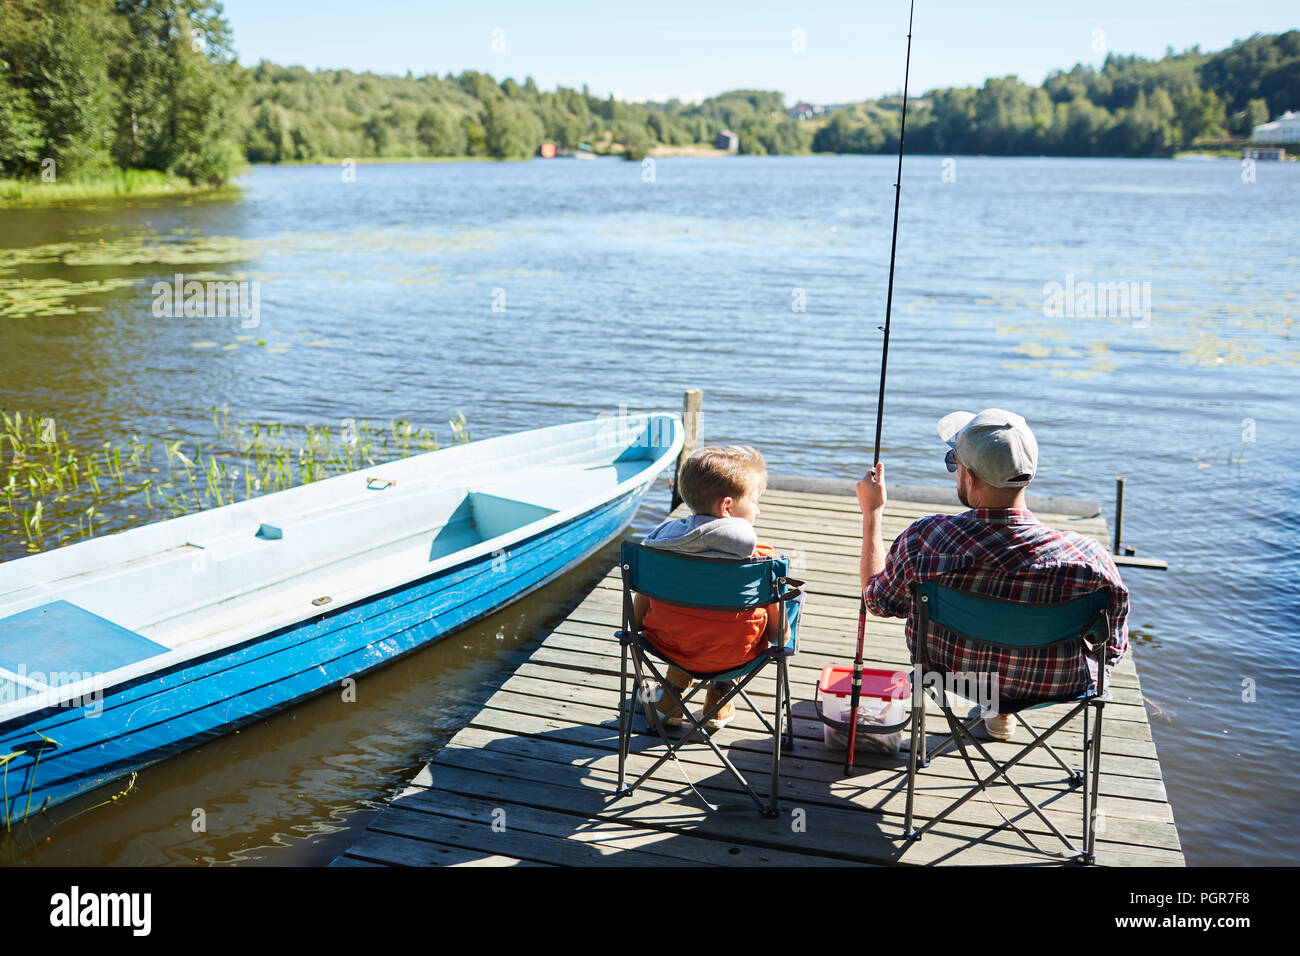 https://c8.alamy.com/comp/PGR7F8/father-and-son-sitting-on-chairs-on-the-pier-and-fishing-together-among-beautiful-nature-PGR7F8.jpg